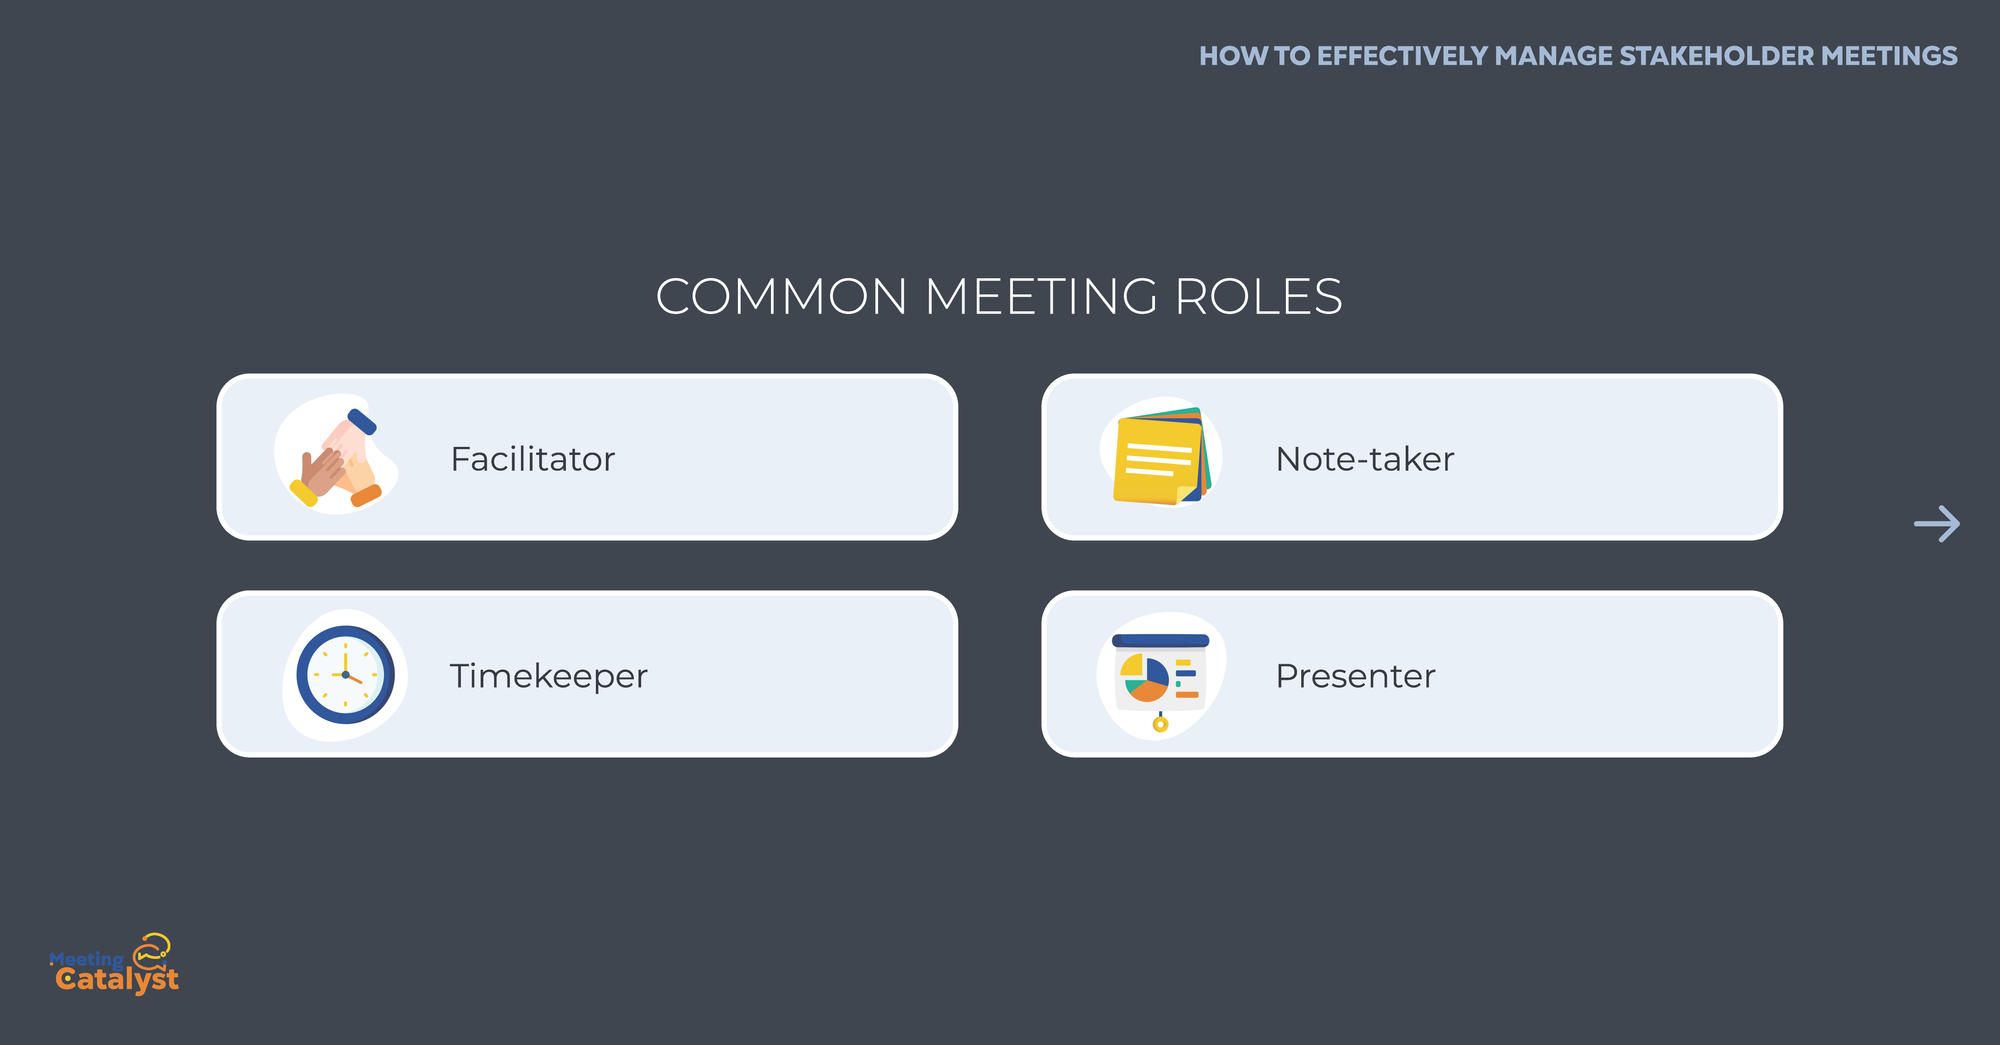 Text boxes listing common meeting roles